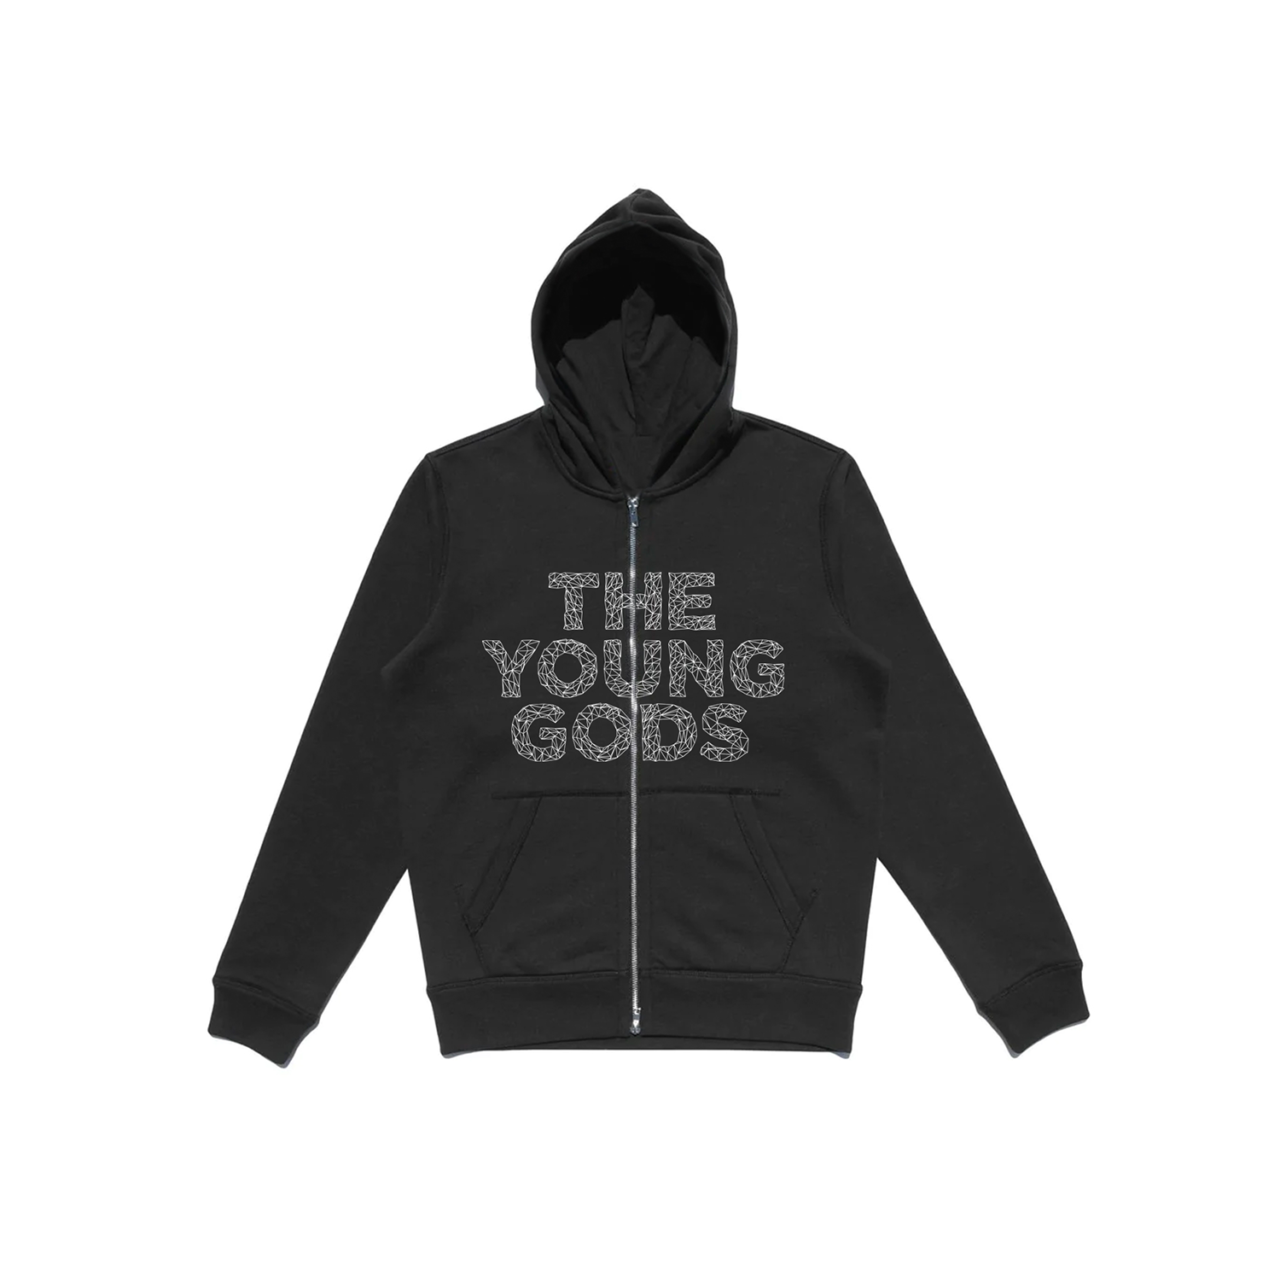 THE YOUNG GODS - Logo Black Hoodie